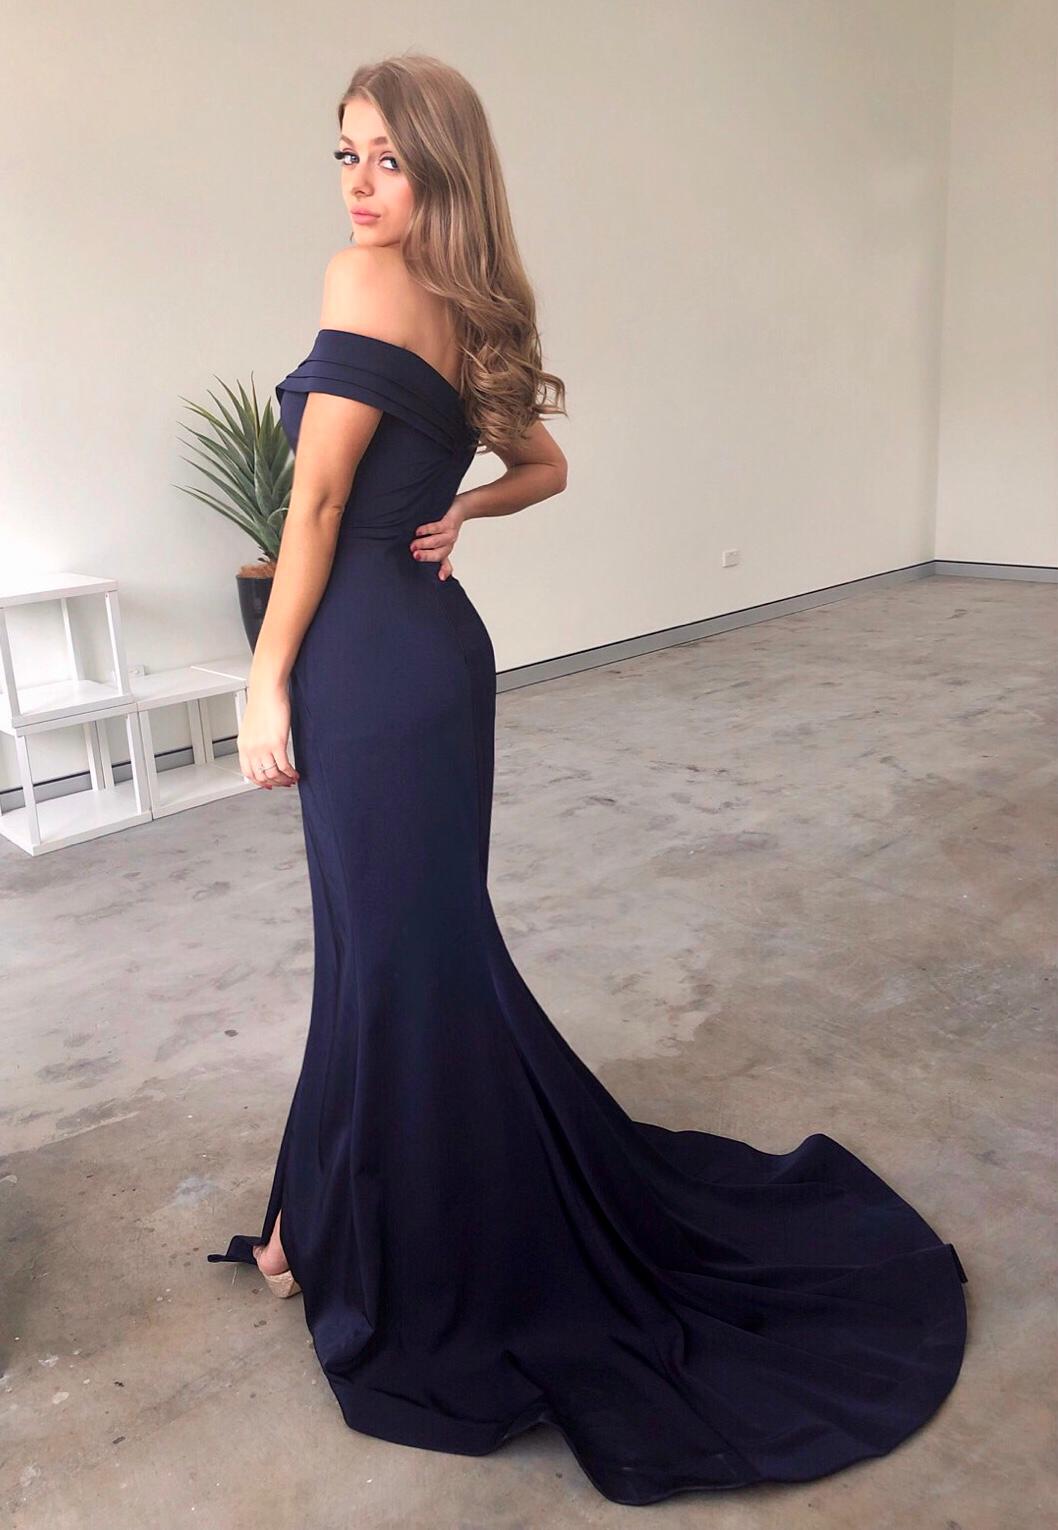 Tinaholy Couture Designer BA115 Navy French Satin Off Shoulder Gown Tina Holly Couture$ AfterPay Humm ZipPay LayBuy Sezzle